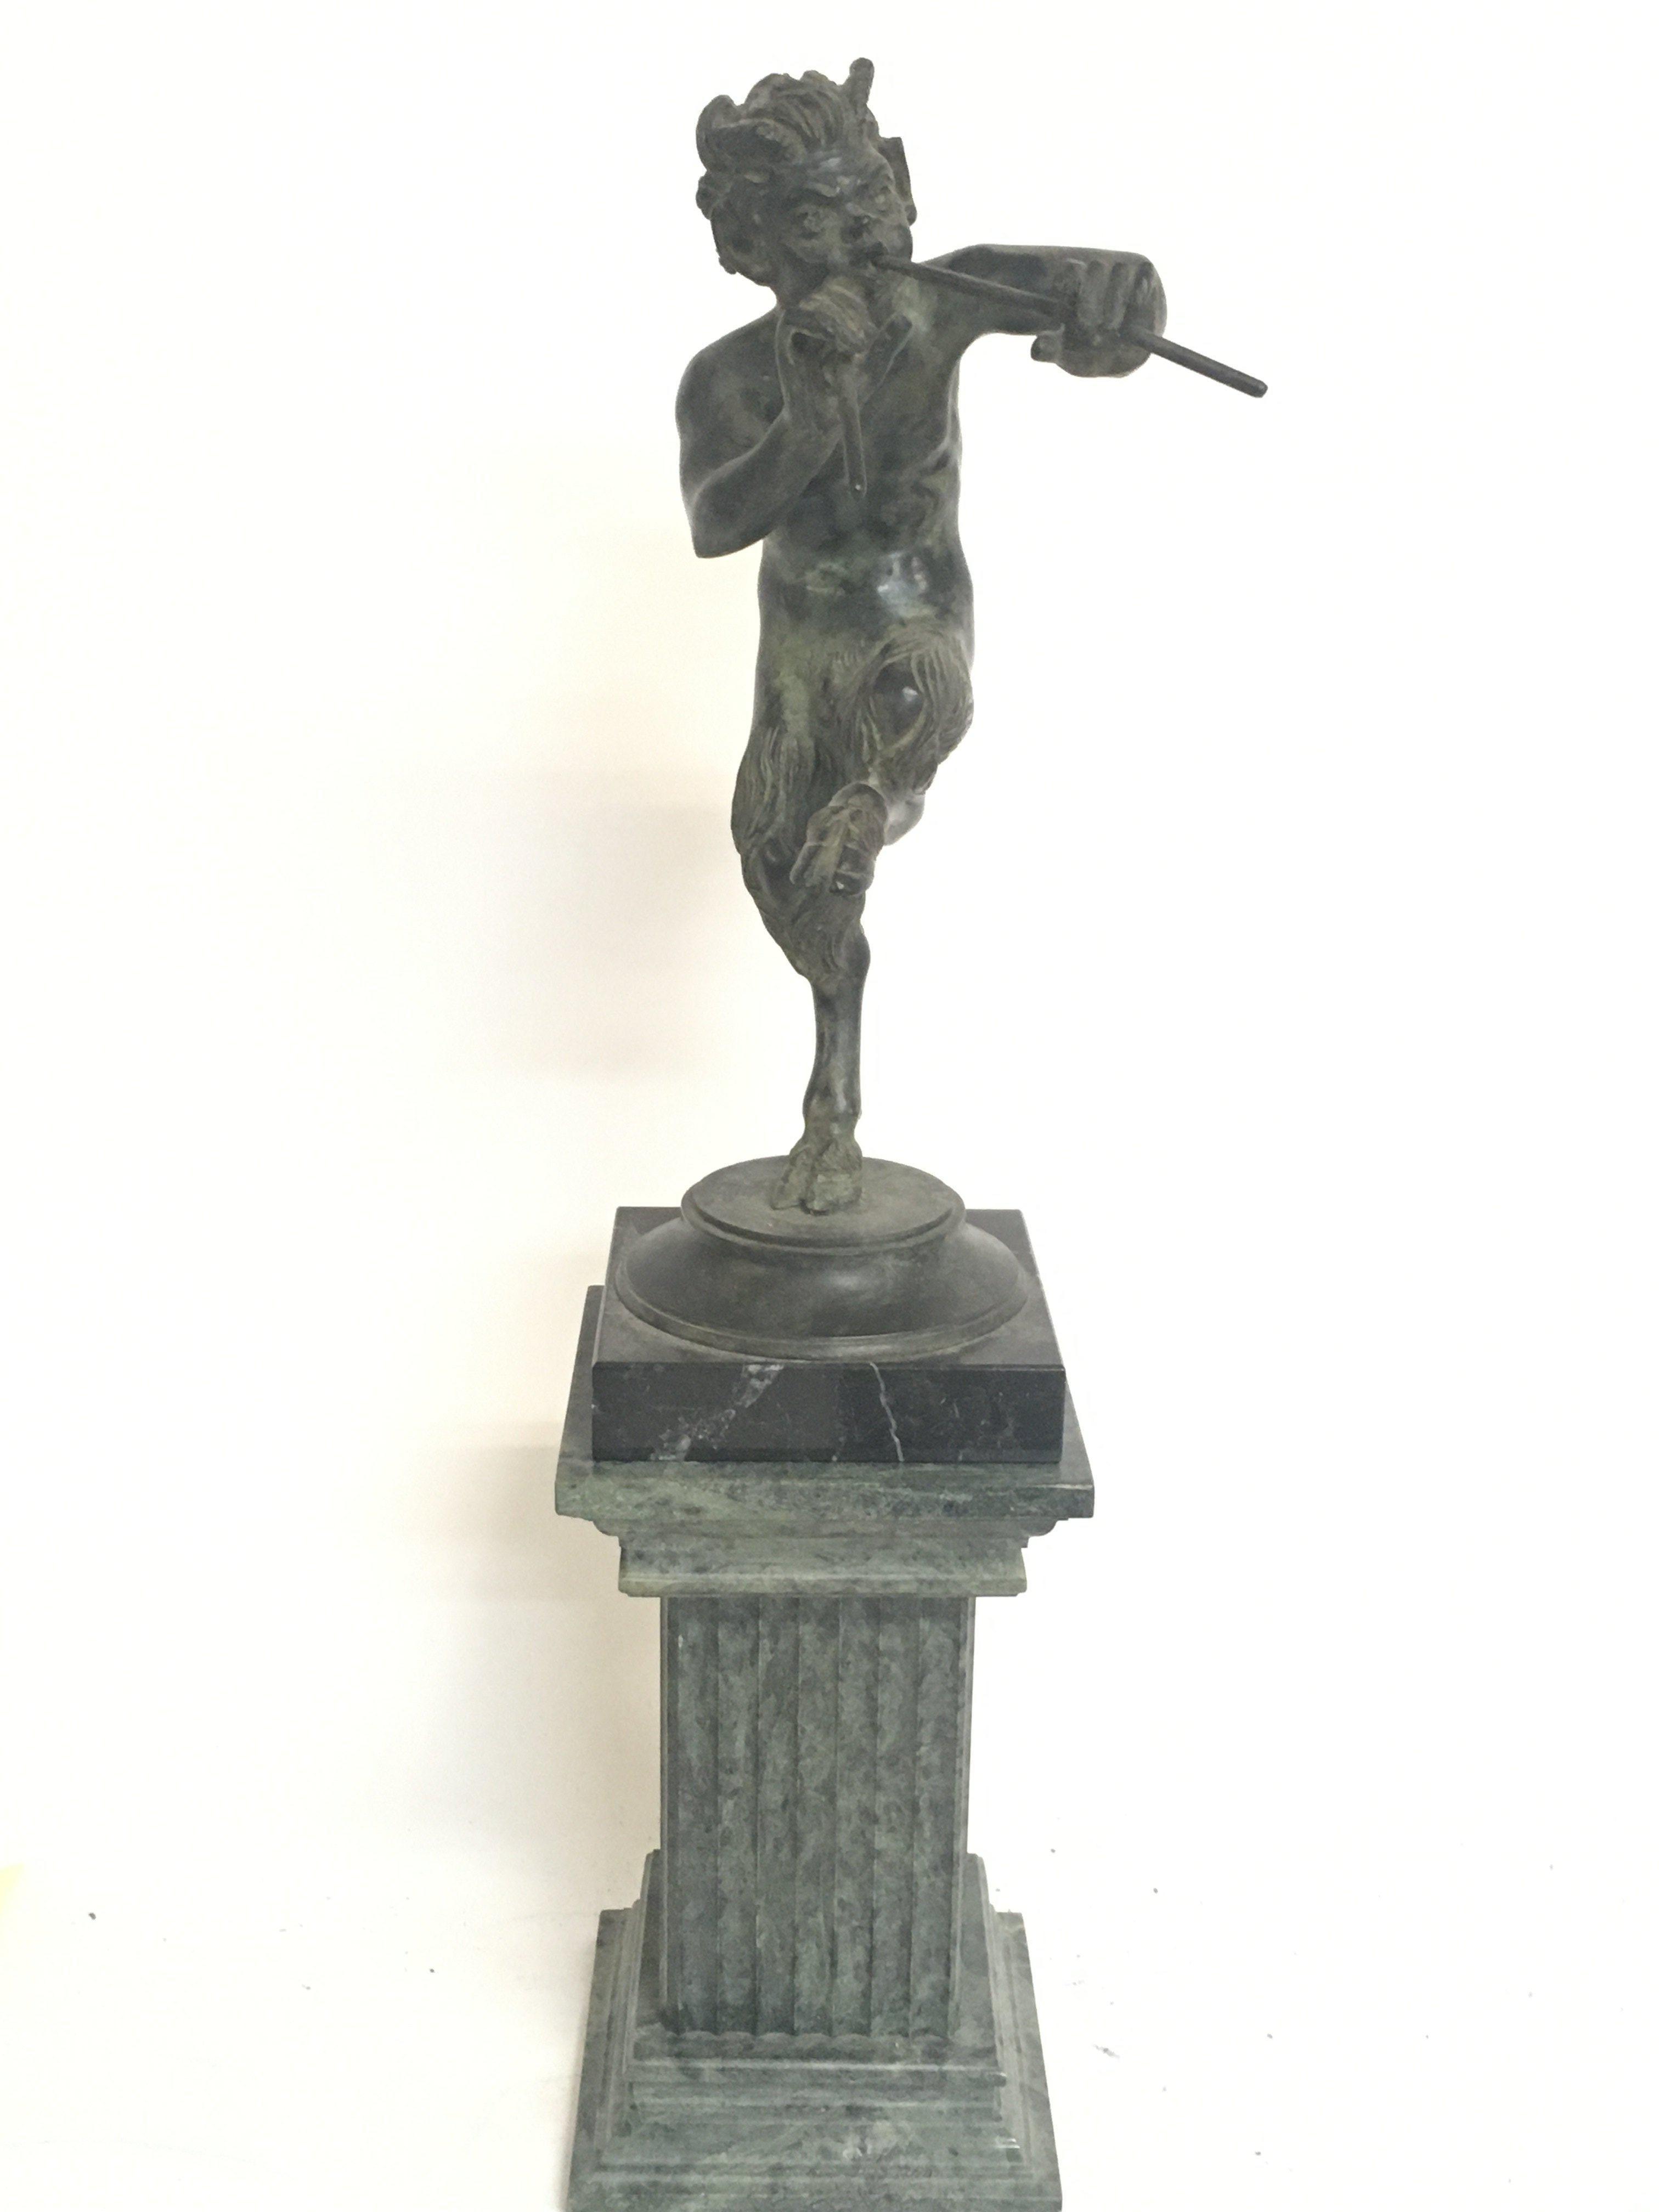 A bronze figure of Pan on a marble base, 42cm tall